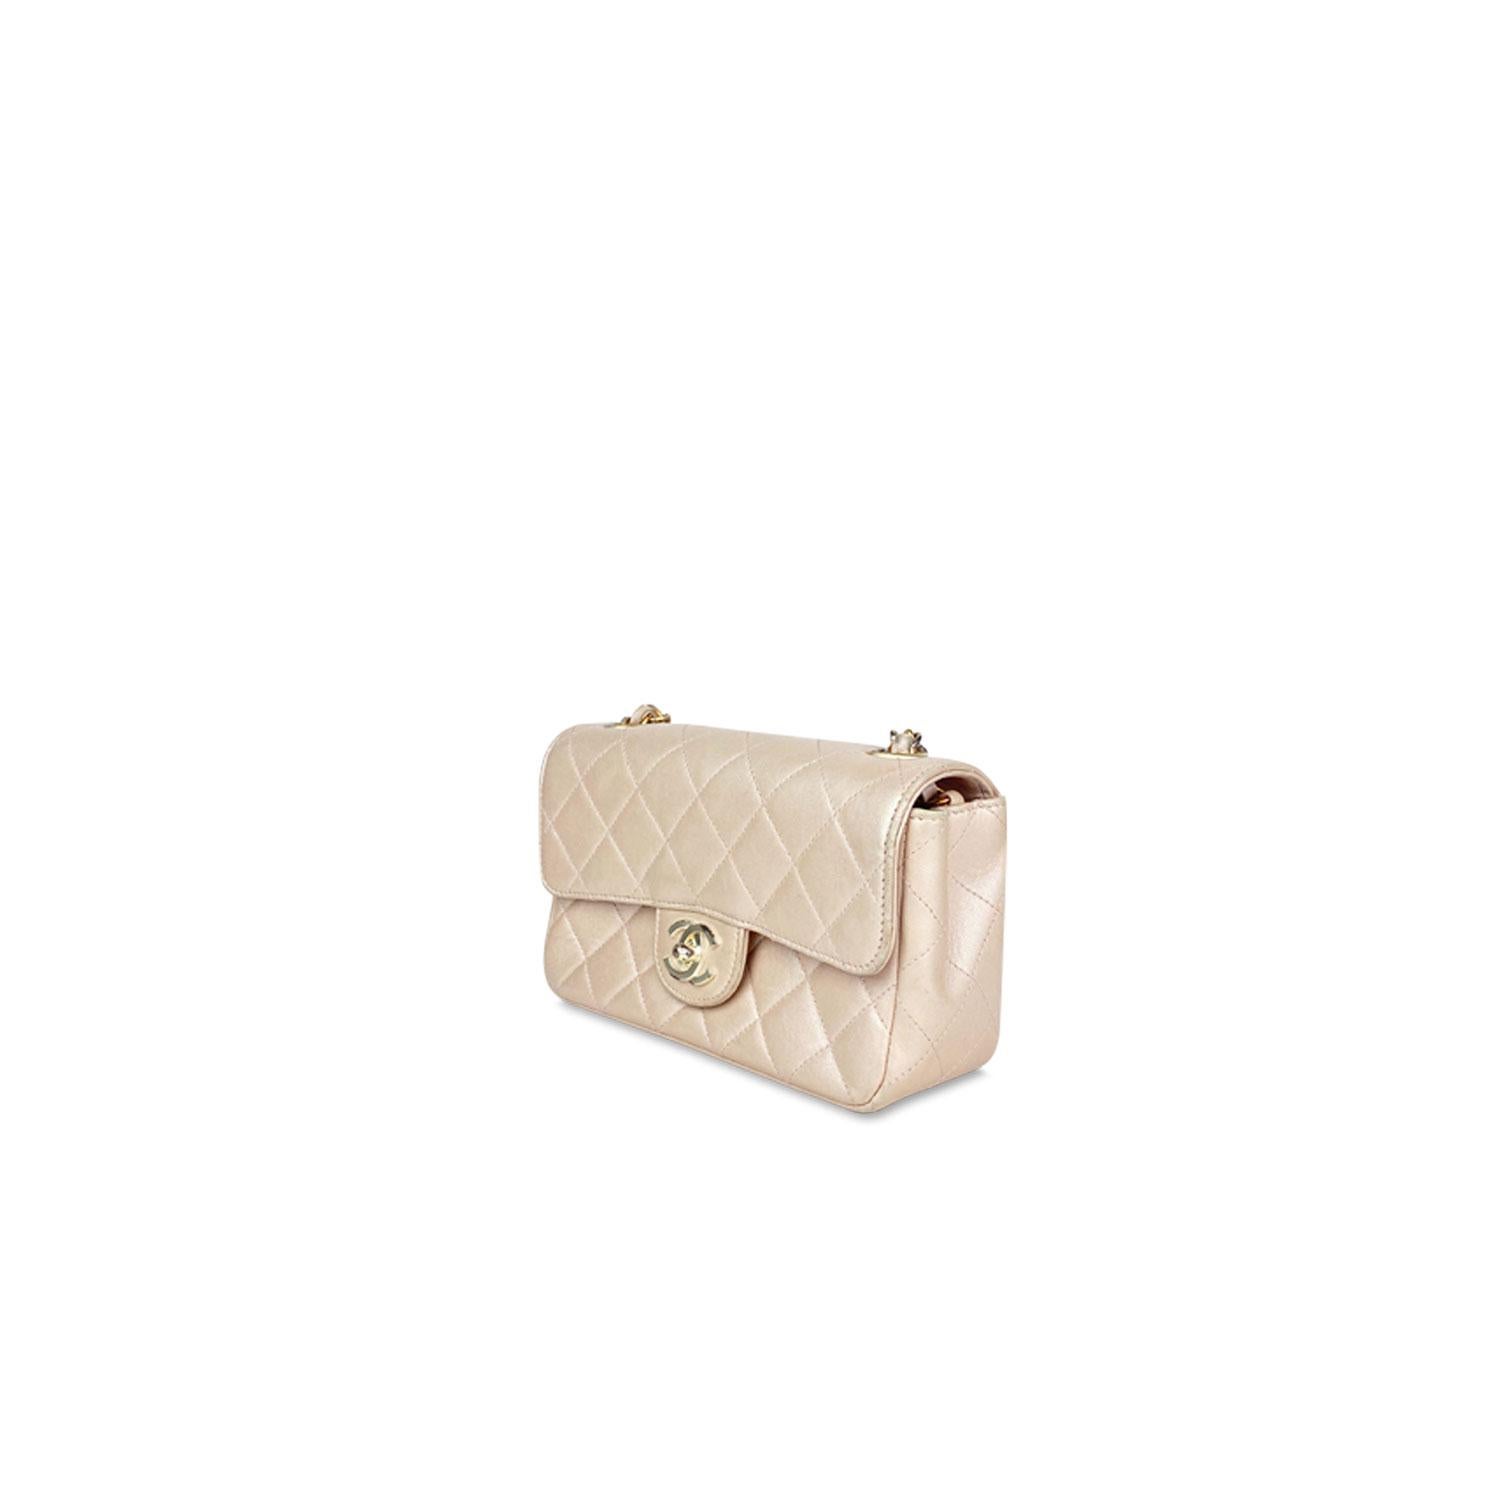 Nude quilted leather Chanel Classic Mini Rectangular flap bag with

- Gold-tone hardware
- Single chain-link and leather shoulder strap
- Pink leather interior
- Dual interior compartments, single interior card slot and magnetic-lock